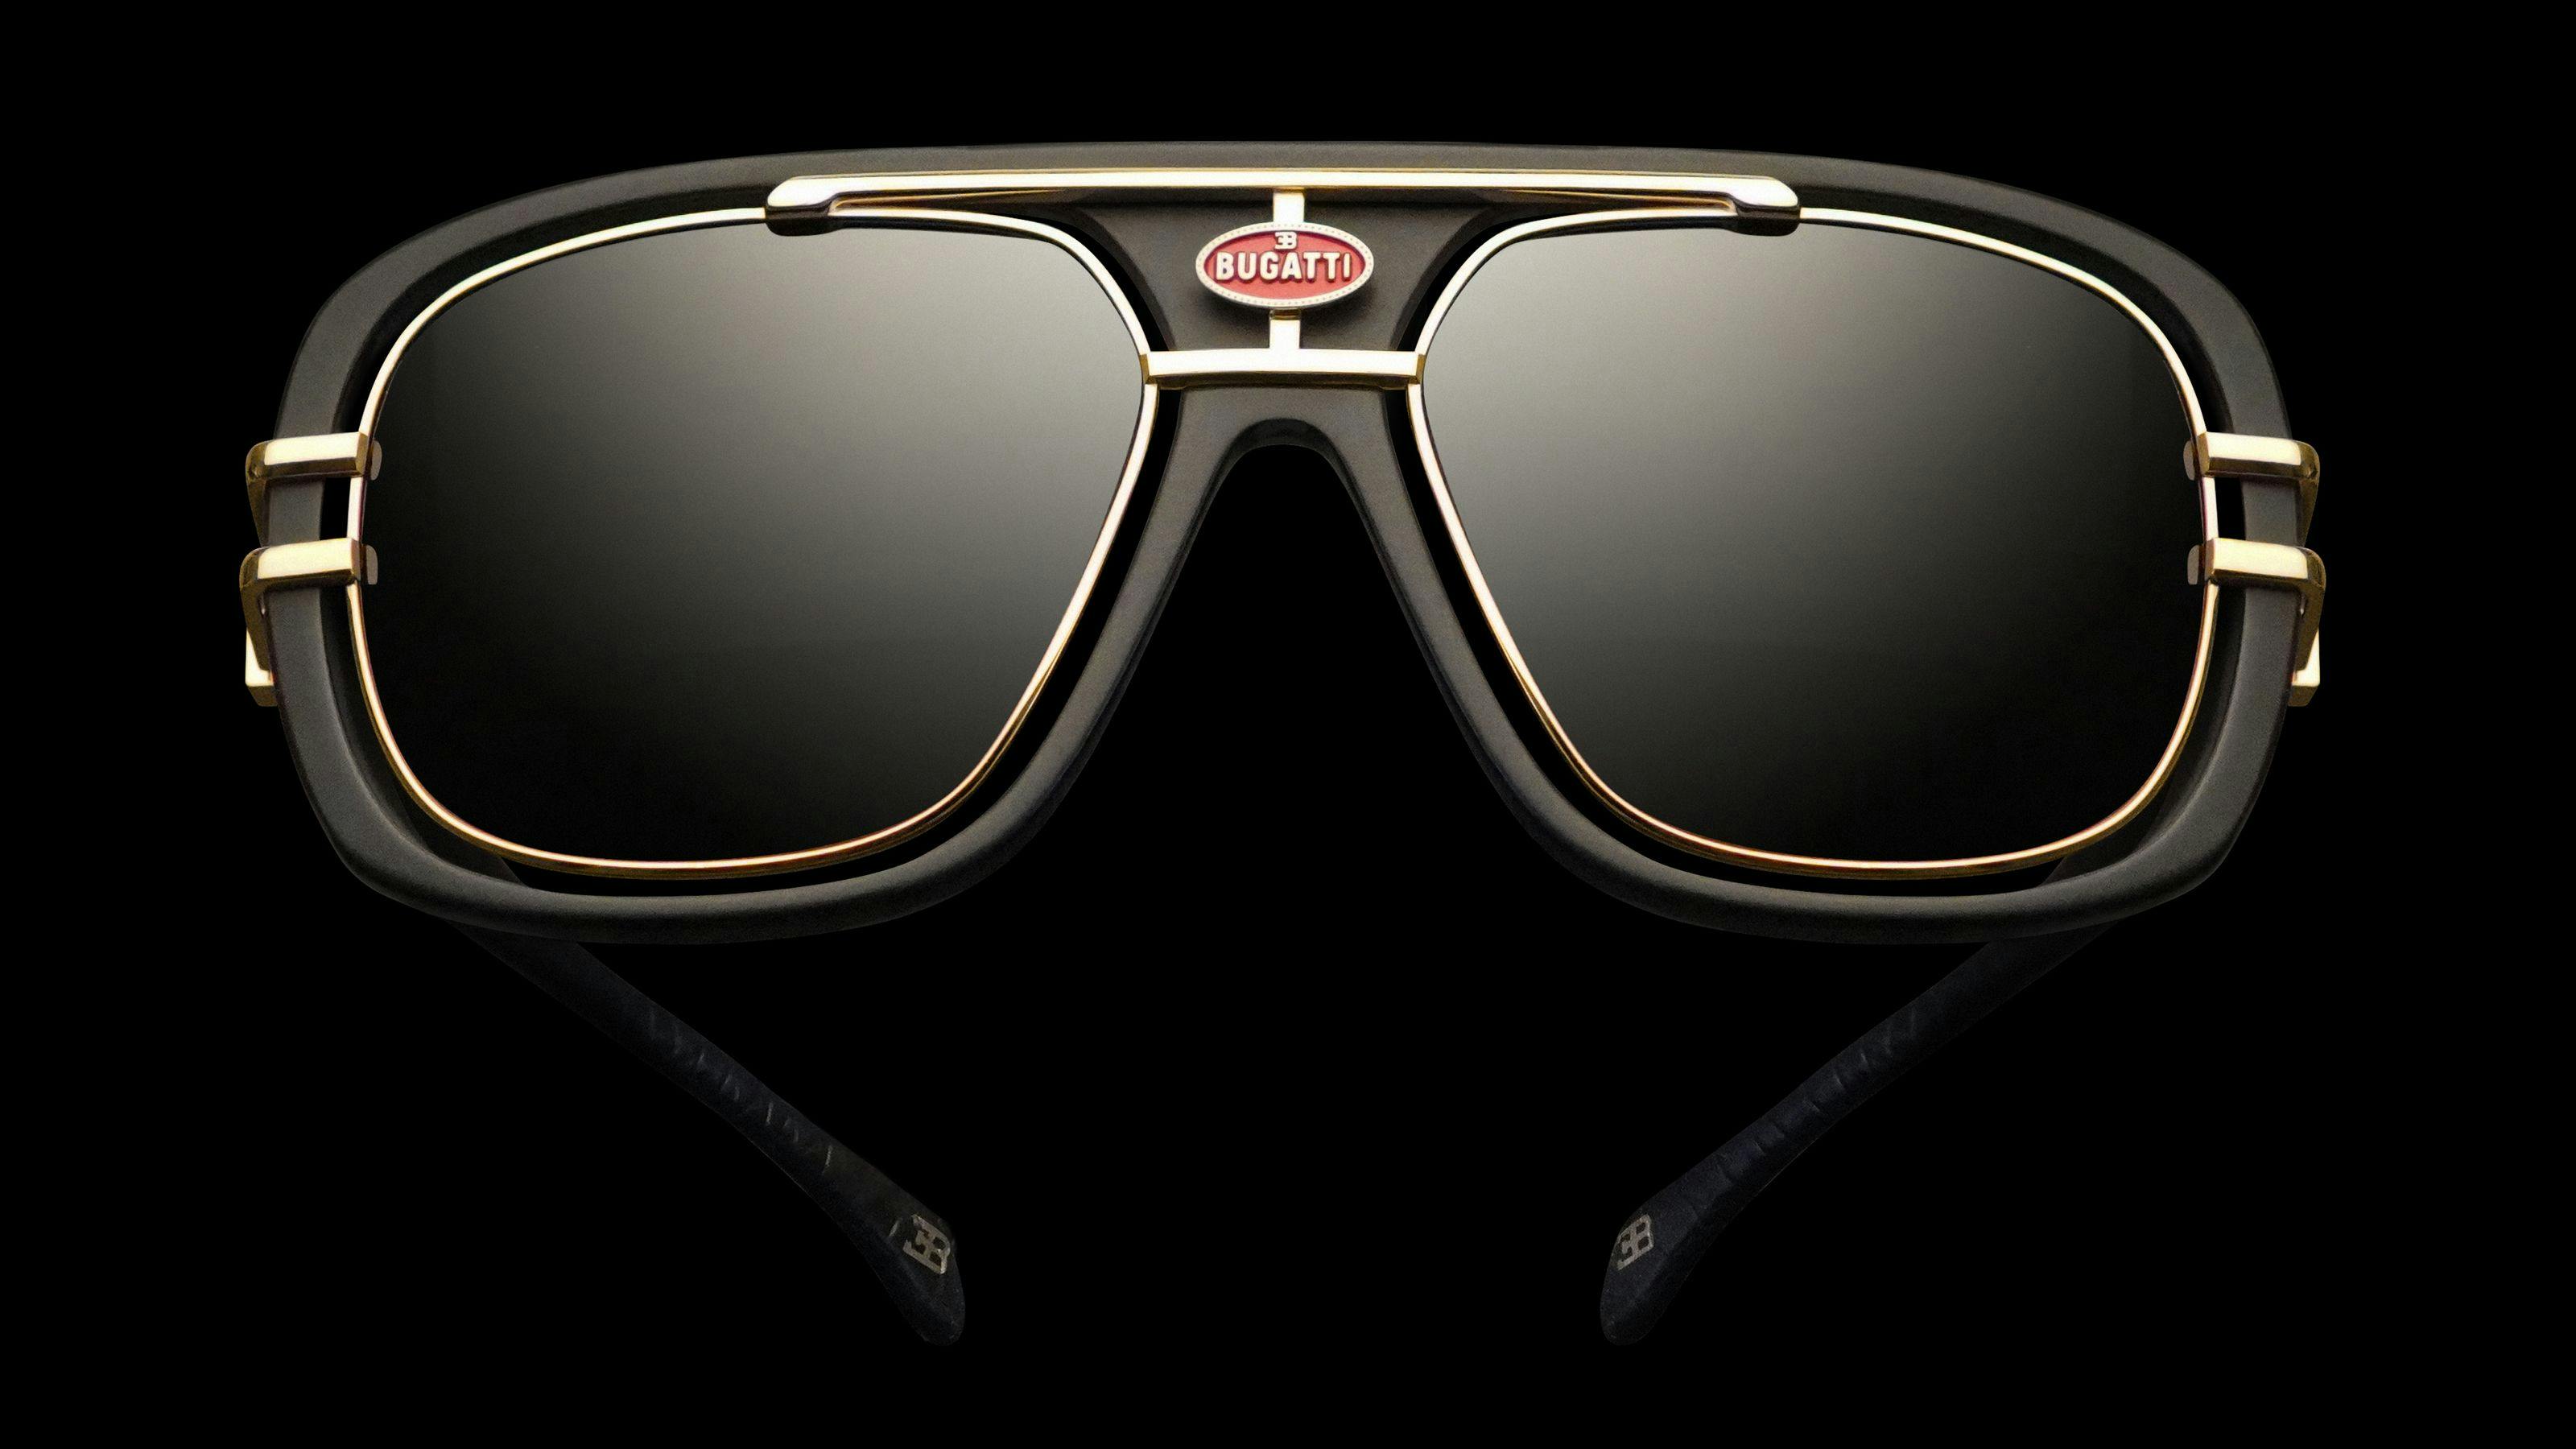 Bugatti and legendary optical designer Larry Sands launch the first-ever Bugatti eyewear collection